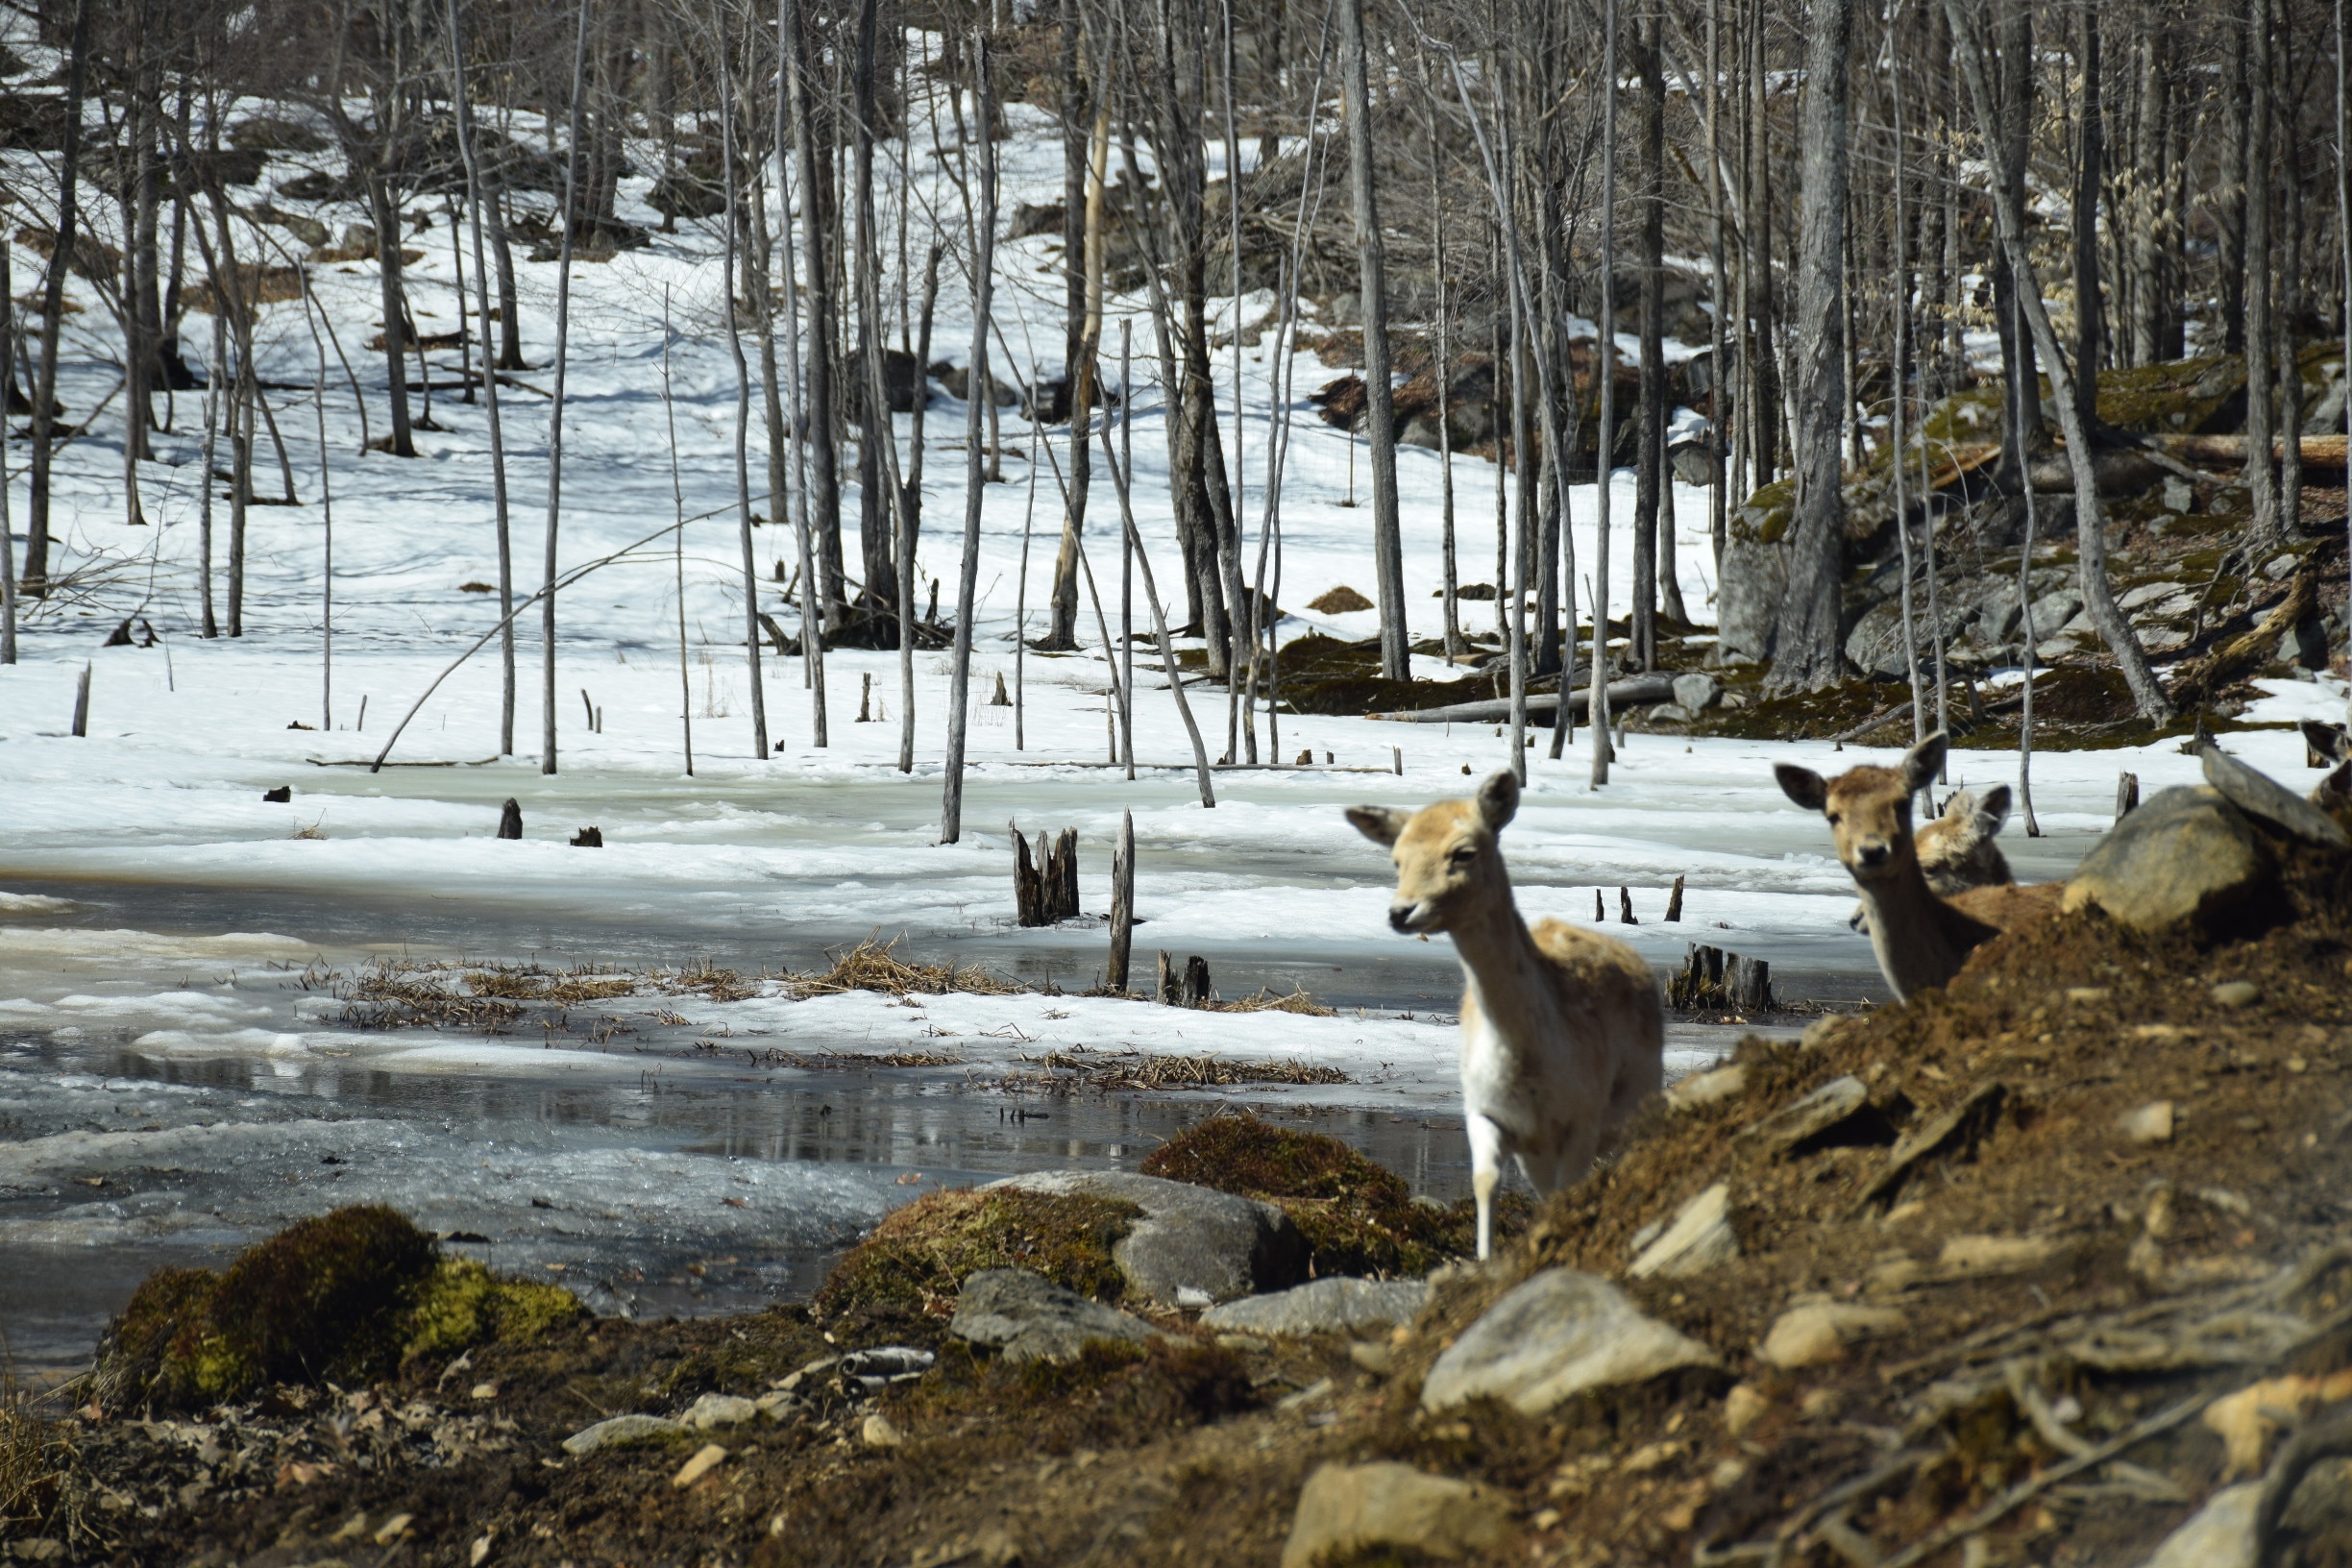 Is it really spring?  A few deer are checking it out at this Canadian safari park.  The park has drive-through and walking trails with fantastic opportunities to see wildlife in a near-natural environment.